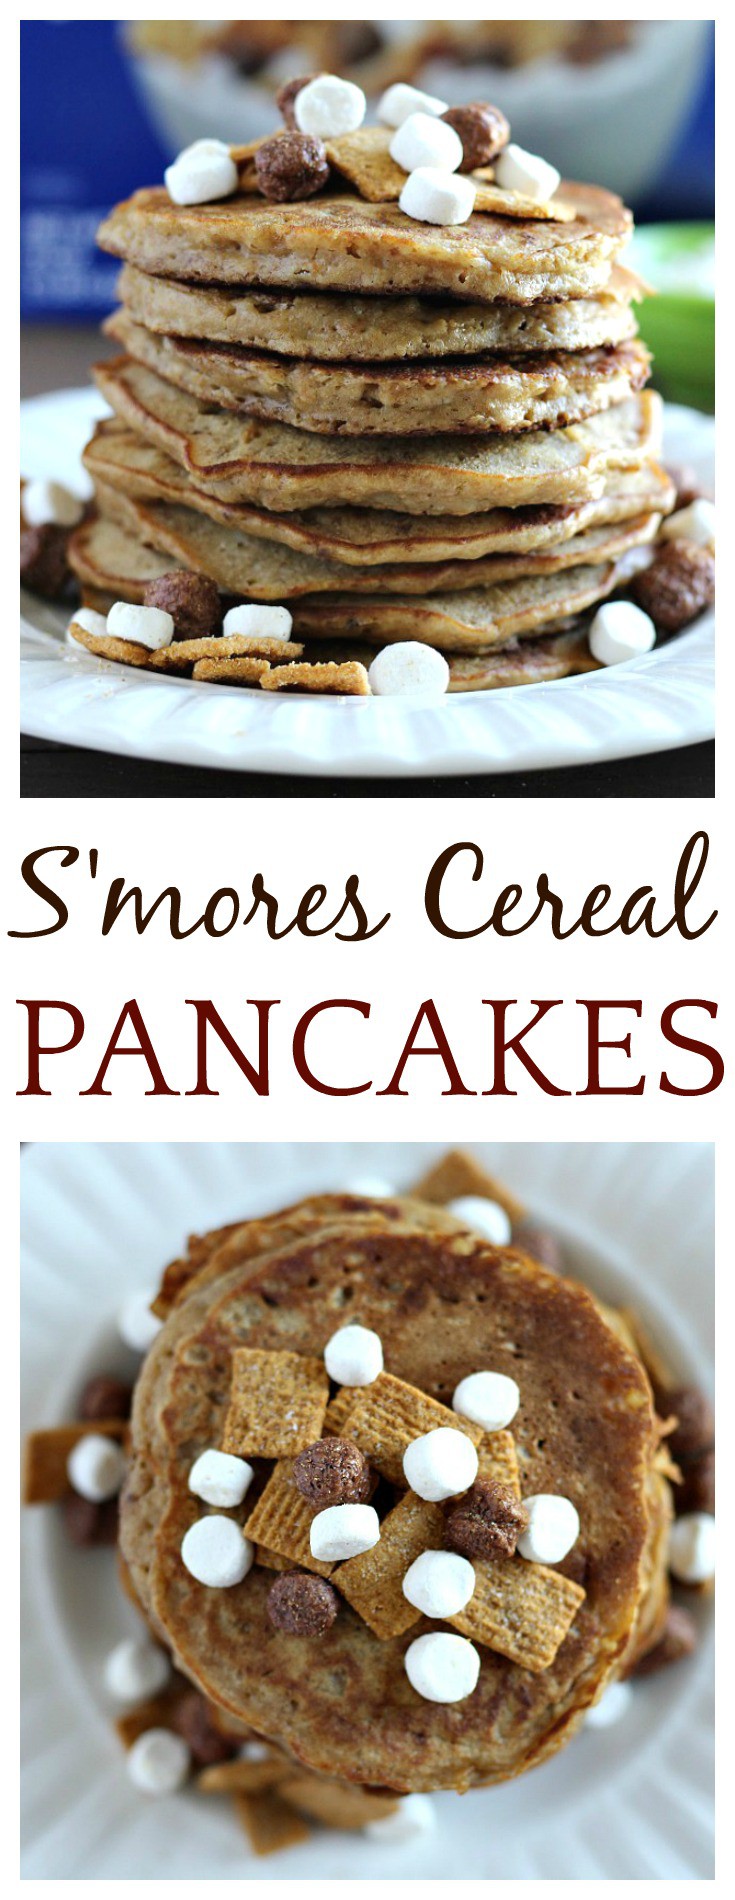 Have a little more fun in the morning with this easy breakfast recipe for delicious S'mores Cereal Pancakes! Kids and adults with love them! | pancakes recipe, brunch recipe, s'mores recipe